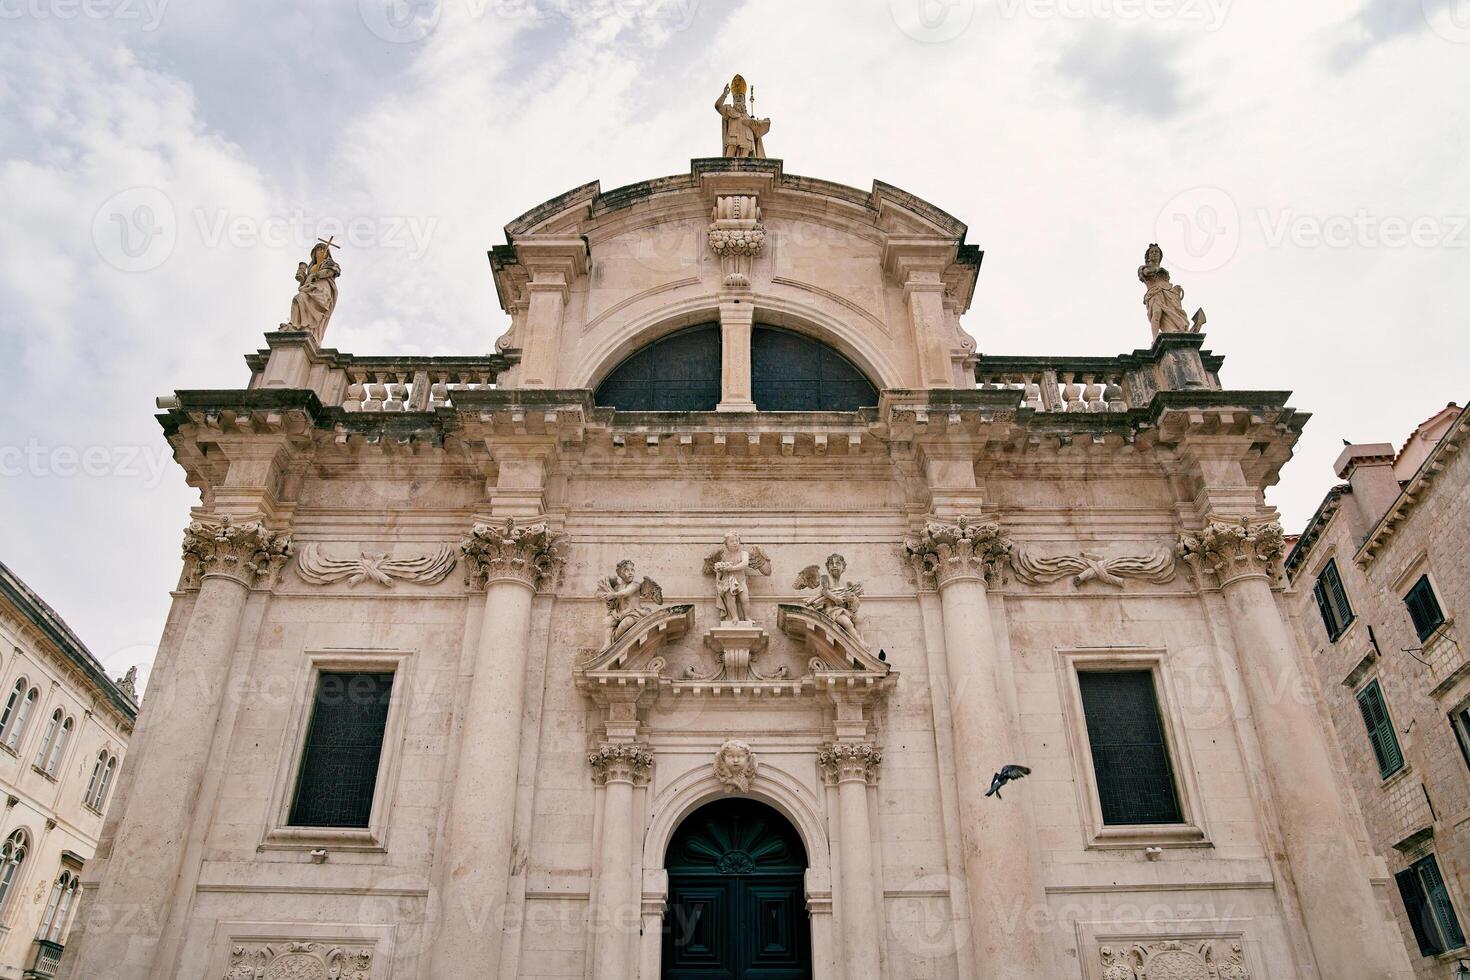 Facade of the Church of St. Blaise with sculptures on the roof. Dubrovnik, Croatia photo